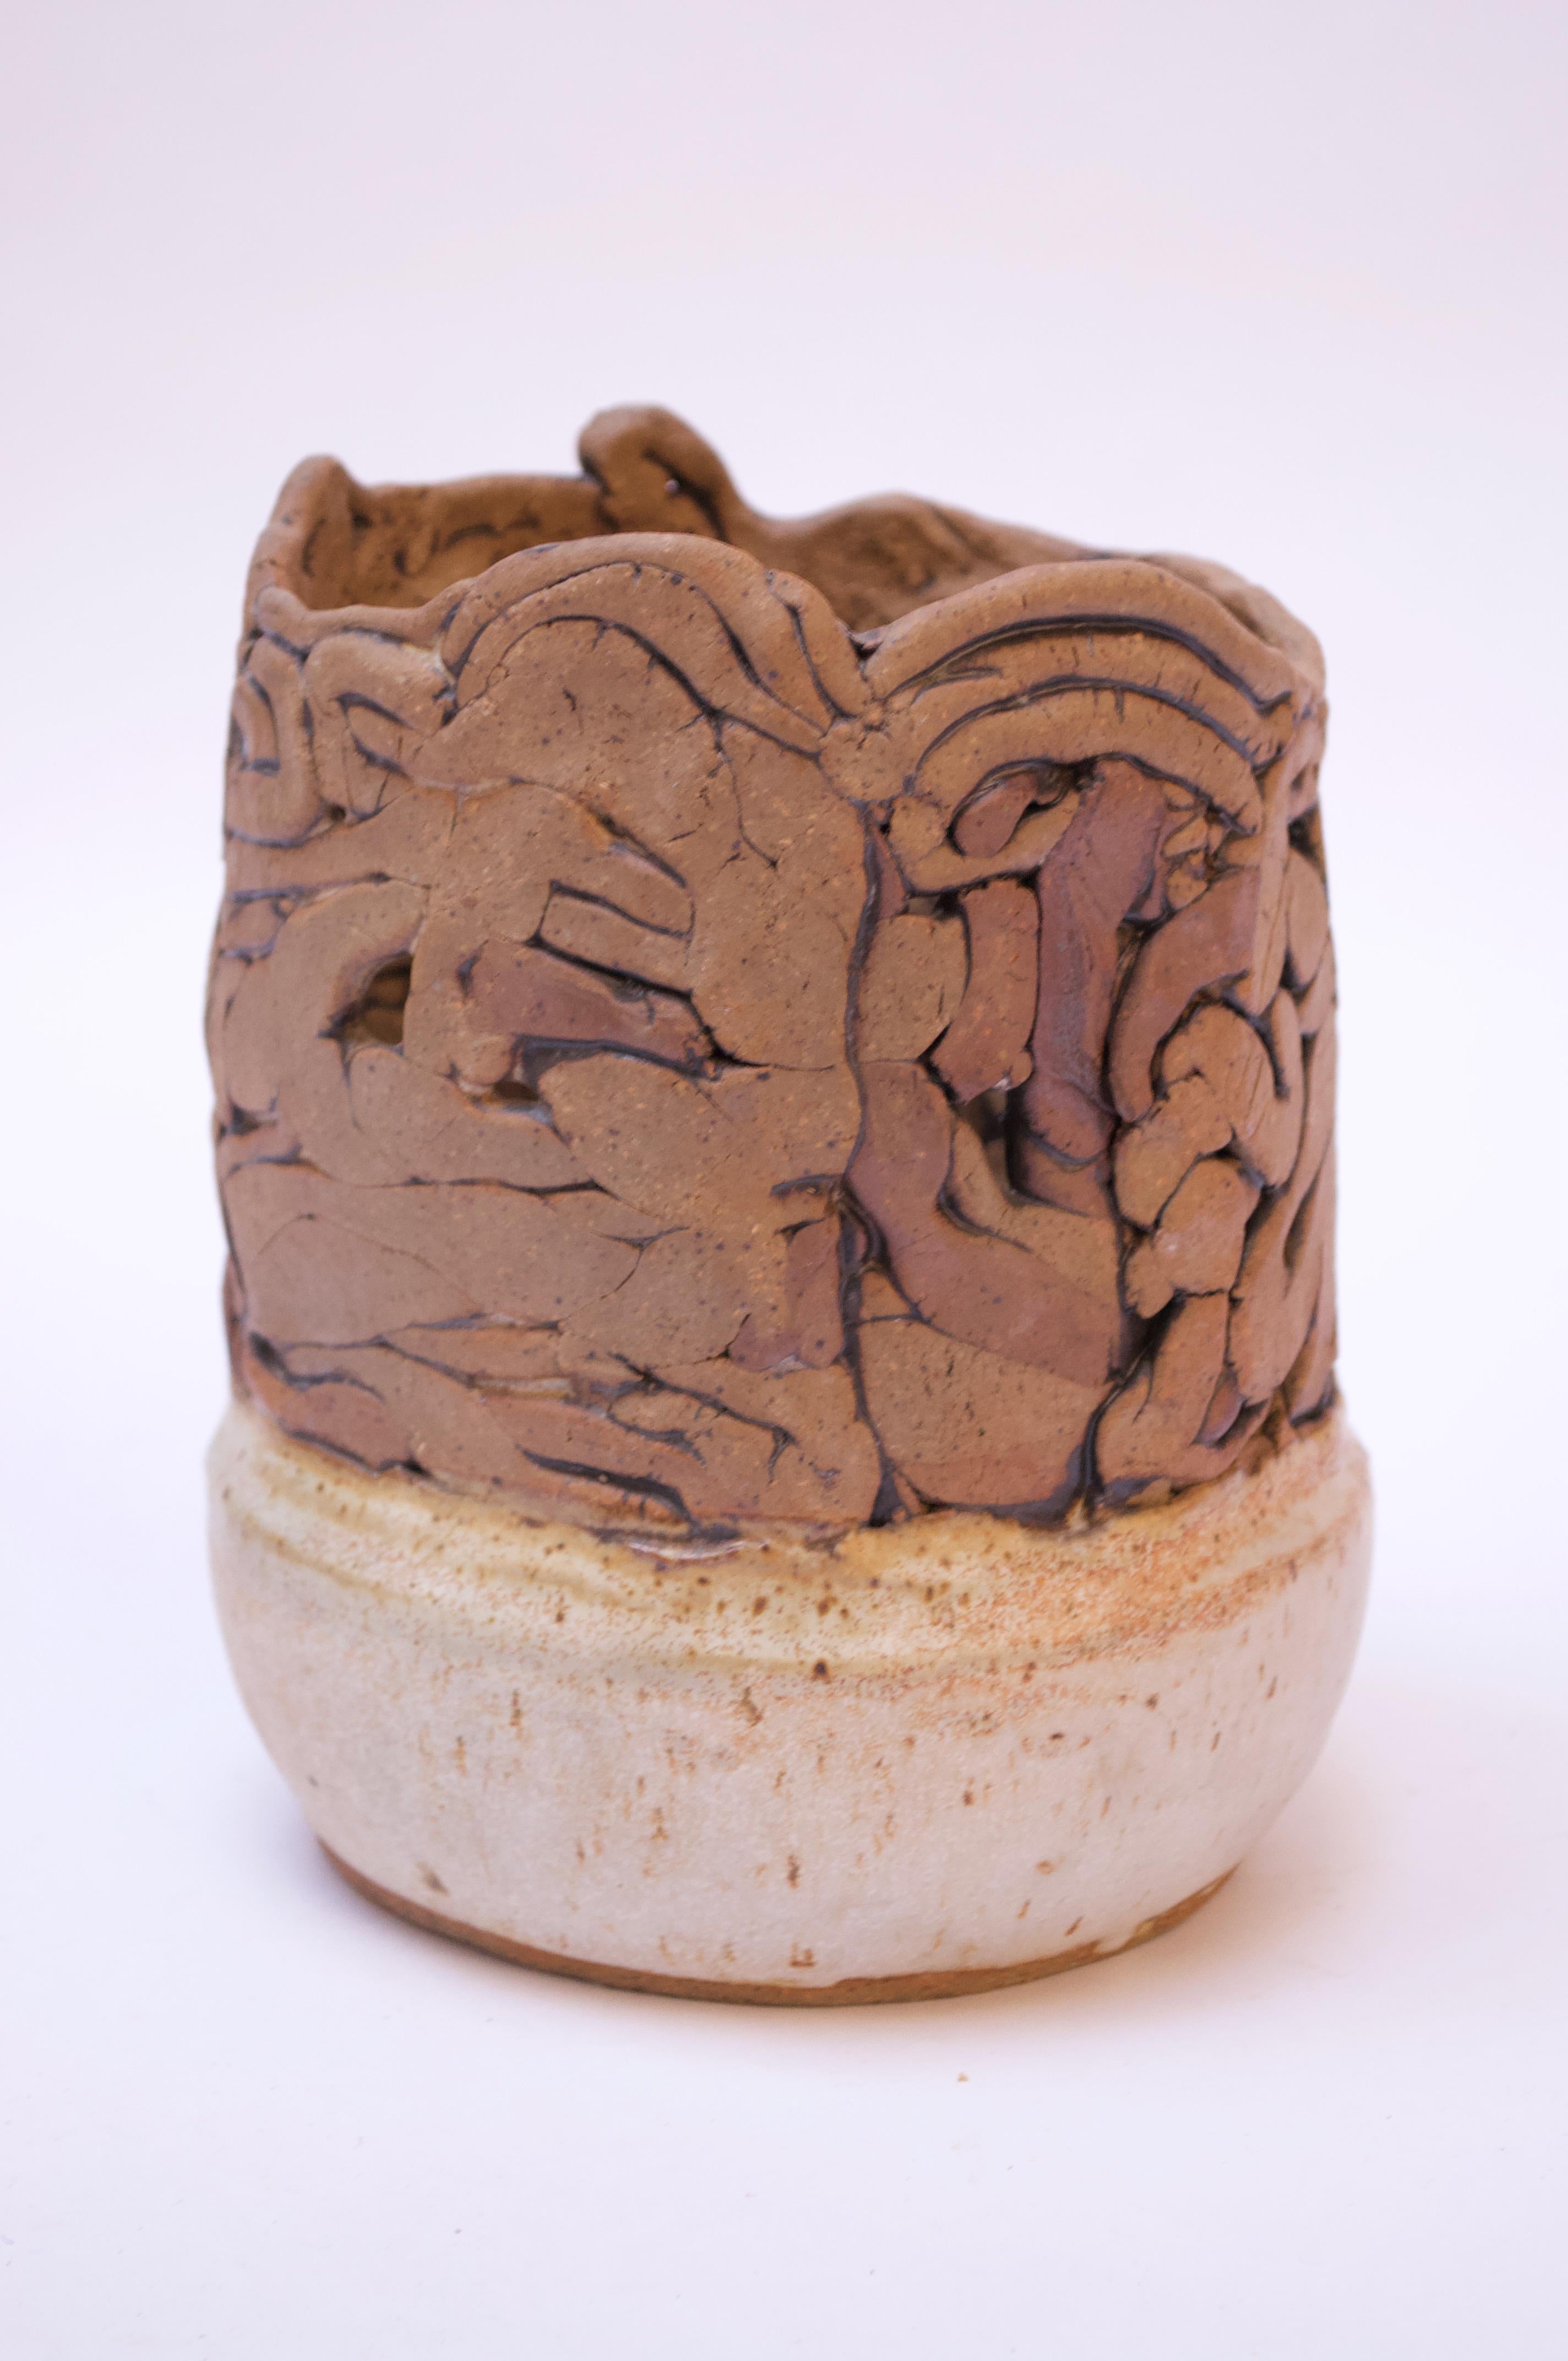 Stoneware vase with densely textured, abstract pattern in brown with a lightly mottled beige base, circa 1970s.
Measures: H 7.25